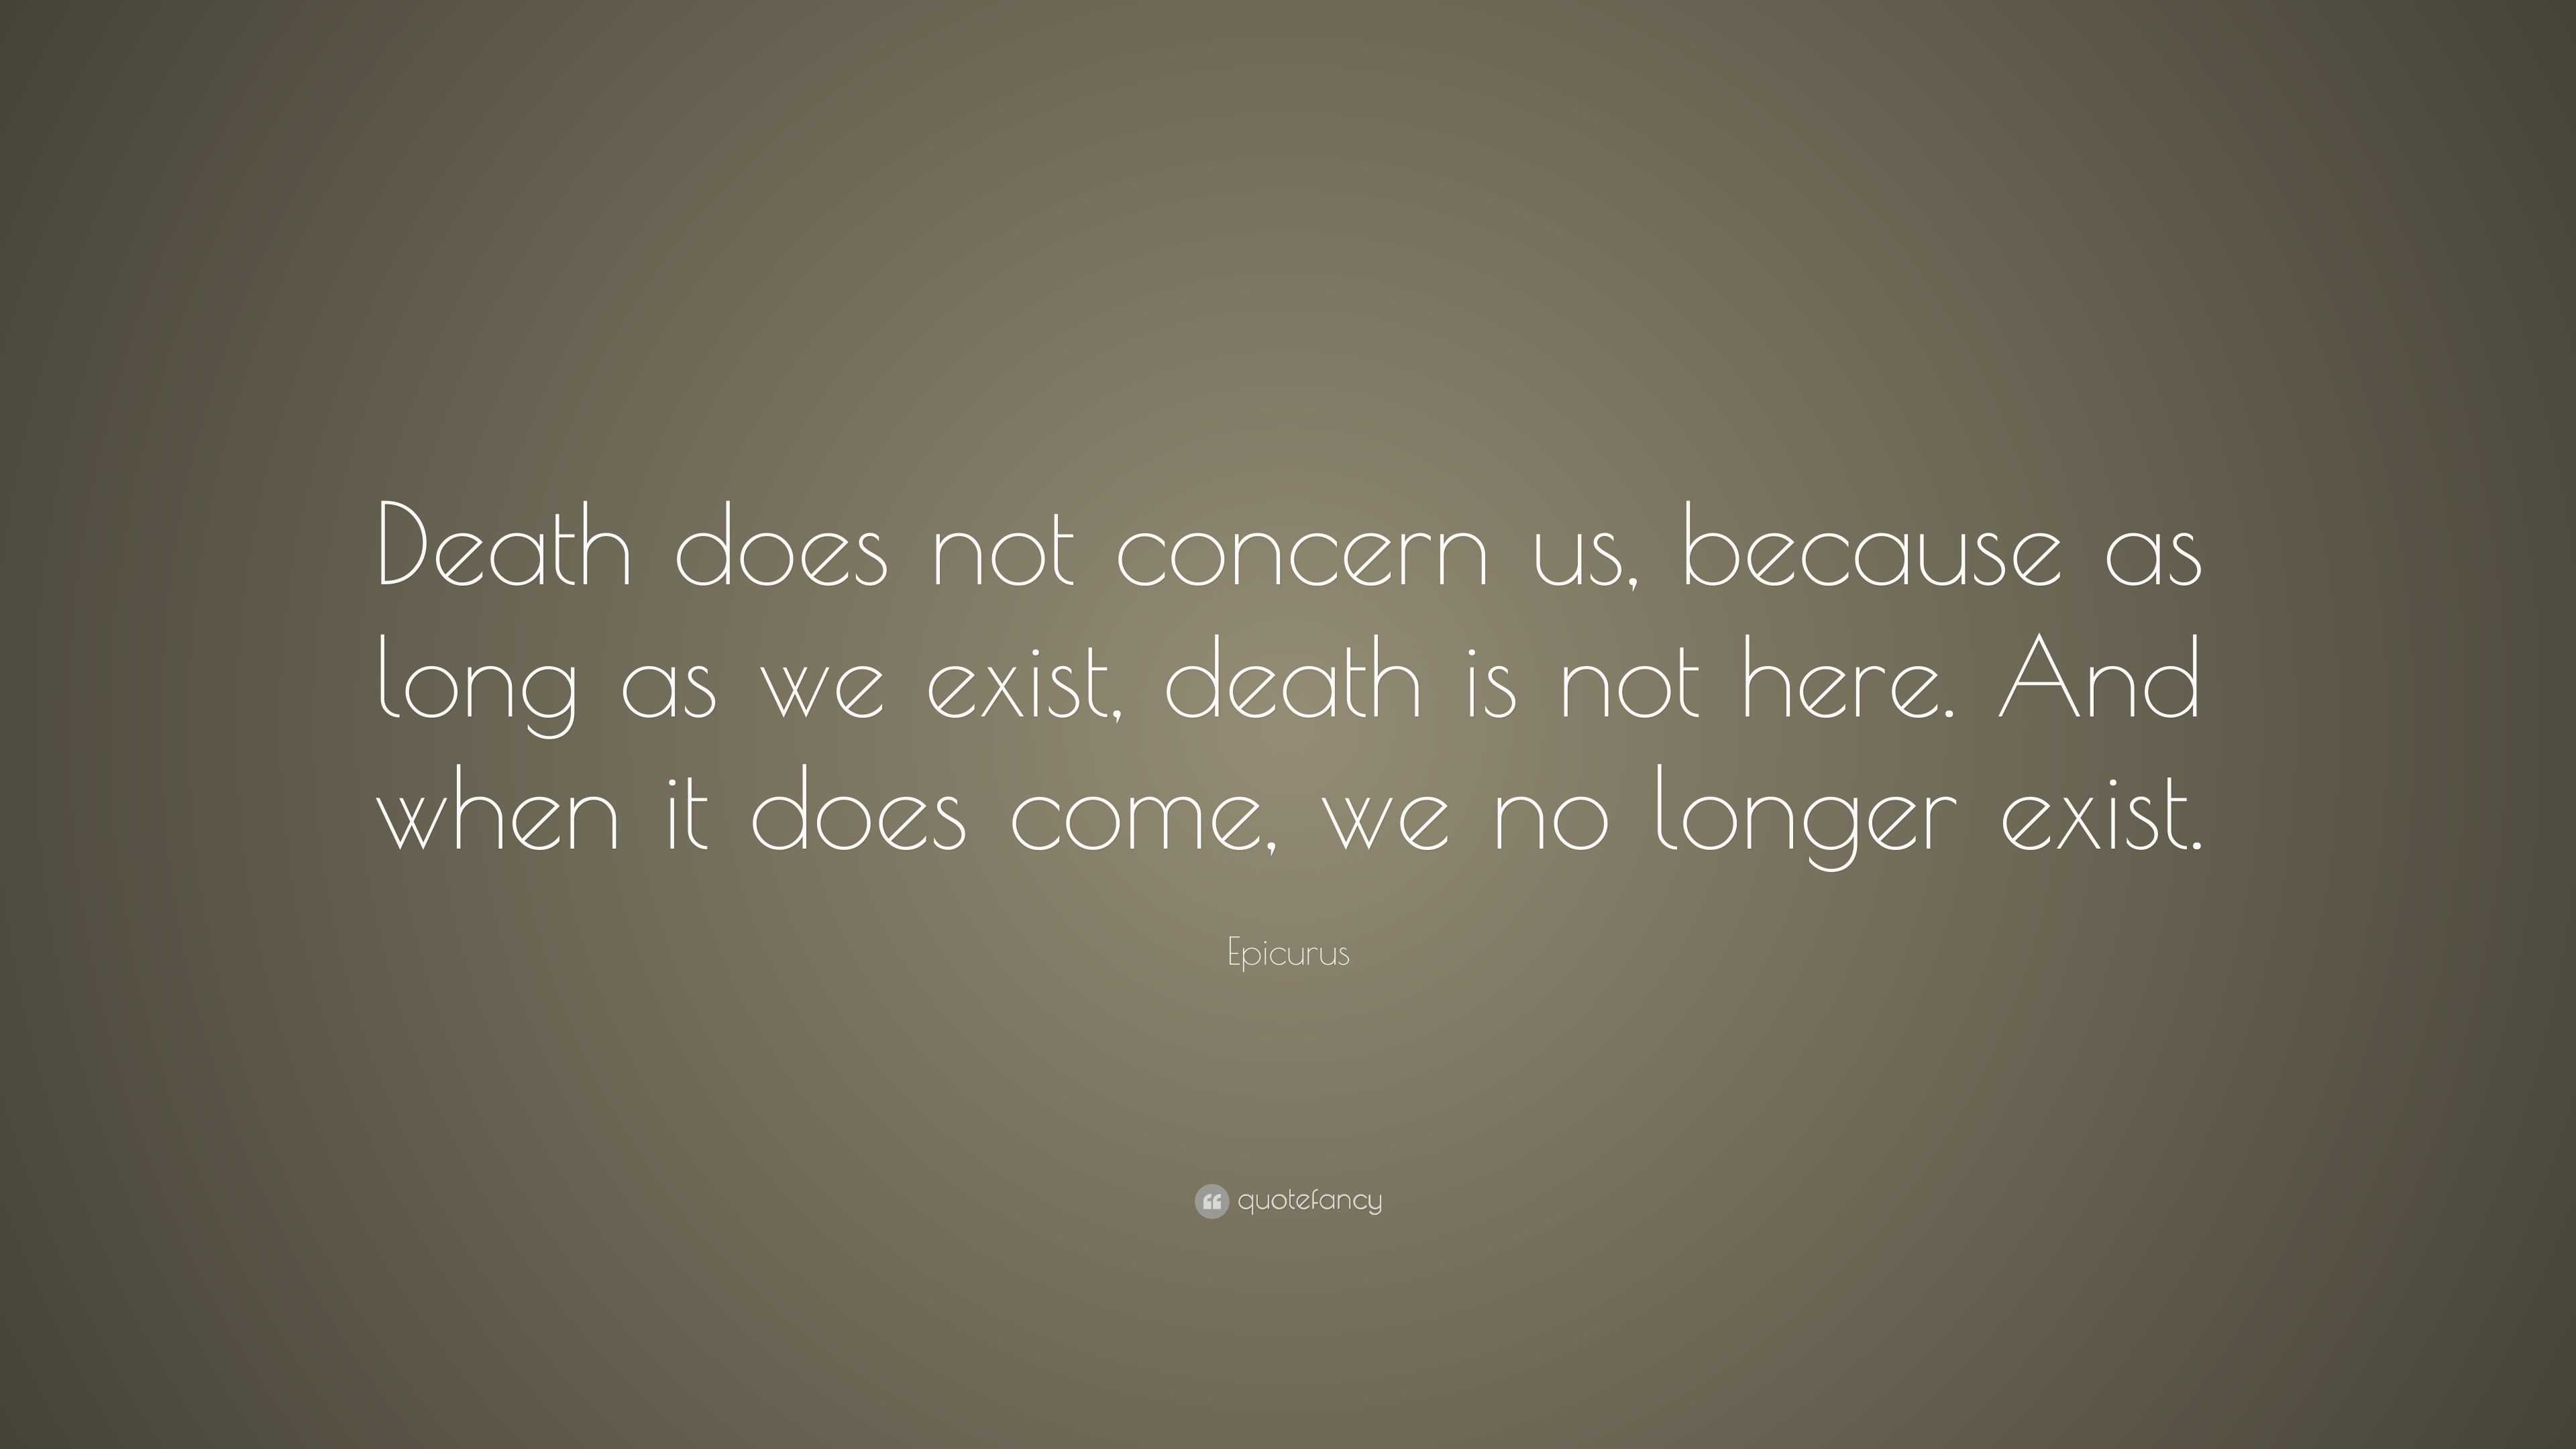 Epicurus Quote: “Death does not concern us, because as long as we exist ...